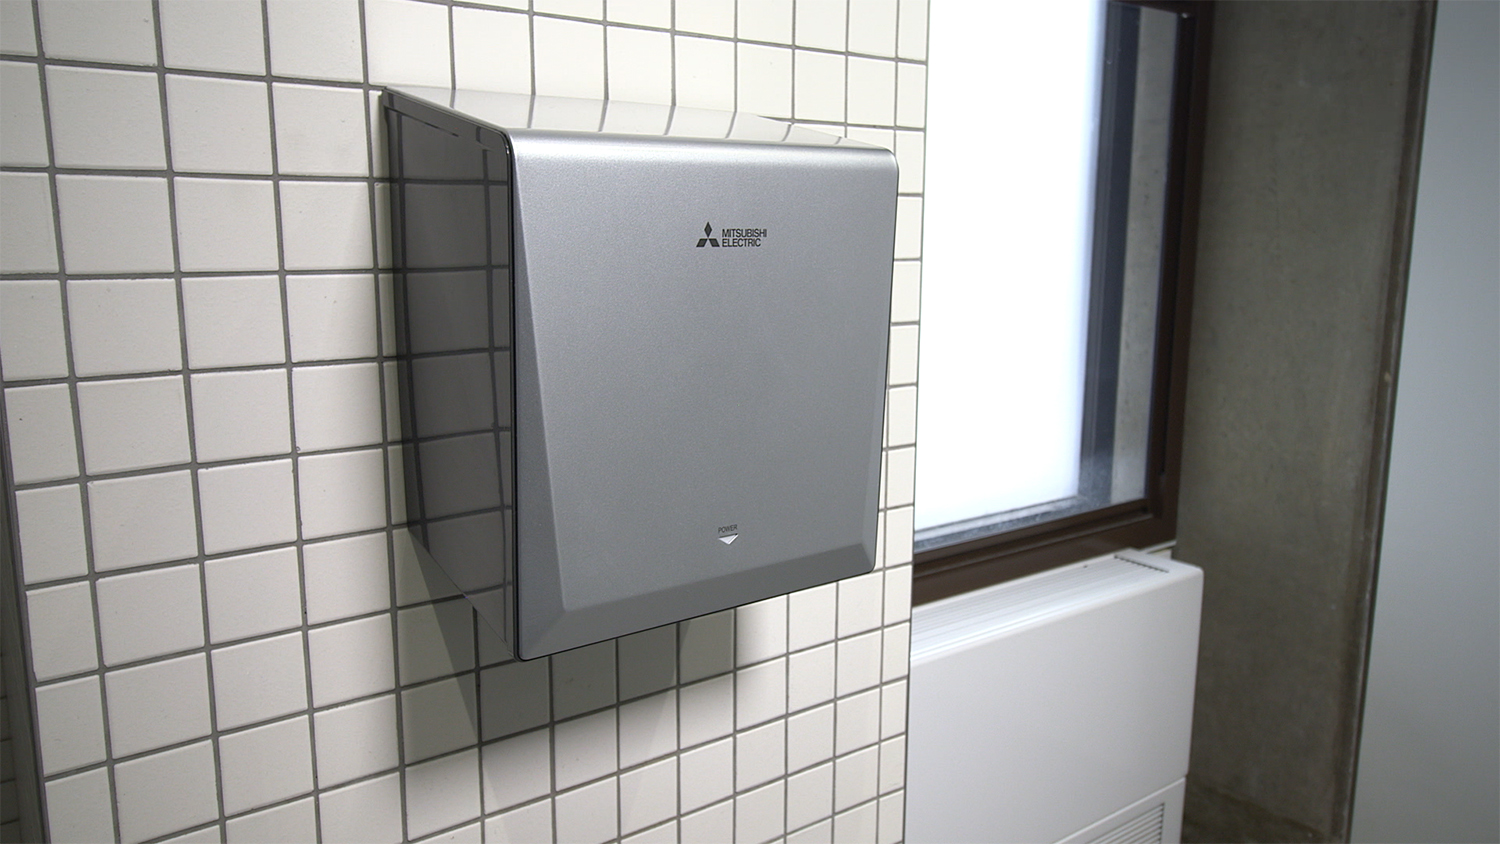 Mitsubishi Electric’s Jet Towel hand dryers are some of the quietest on the market, with a noise output for the Smart version as low as 59 decibels in eco mode. [Source: Mitsubishi Electric Europe B.V.]